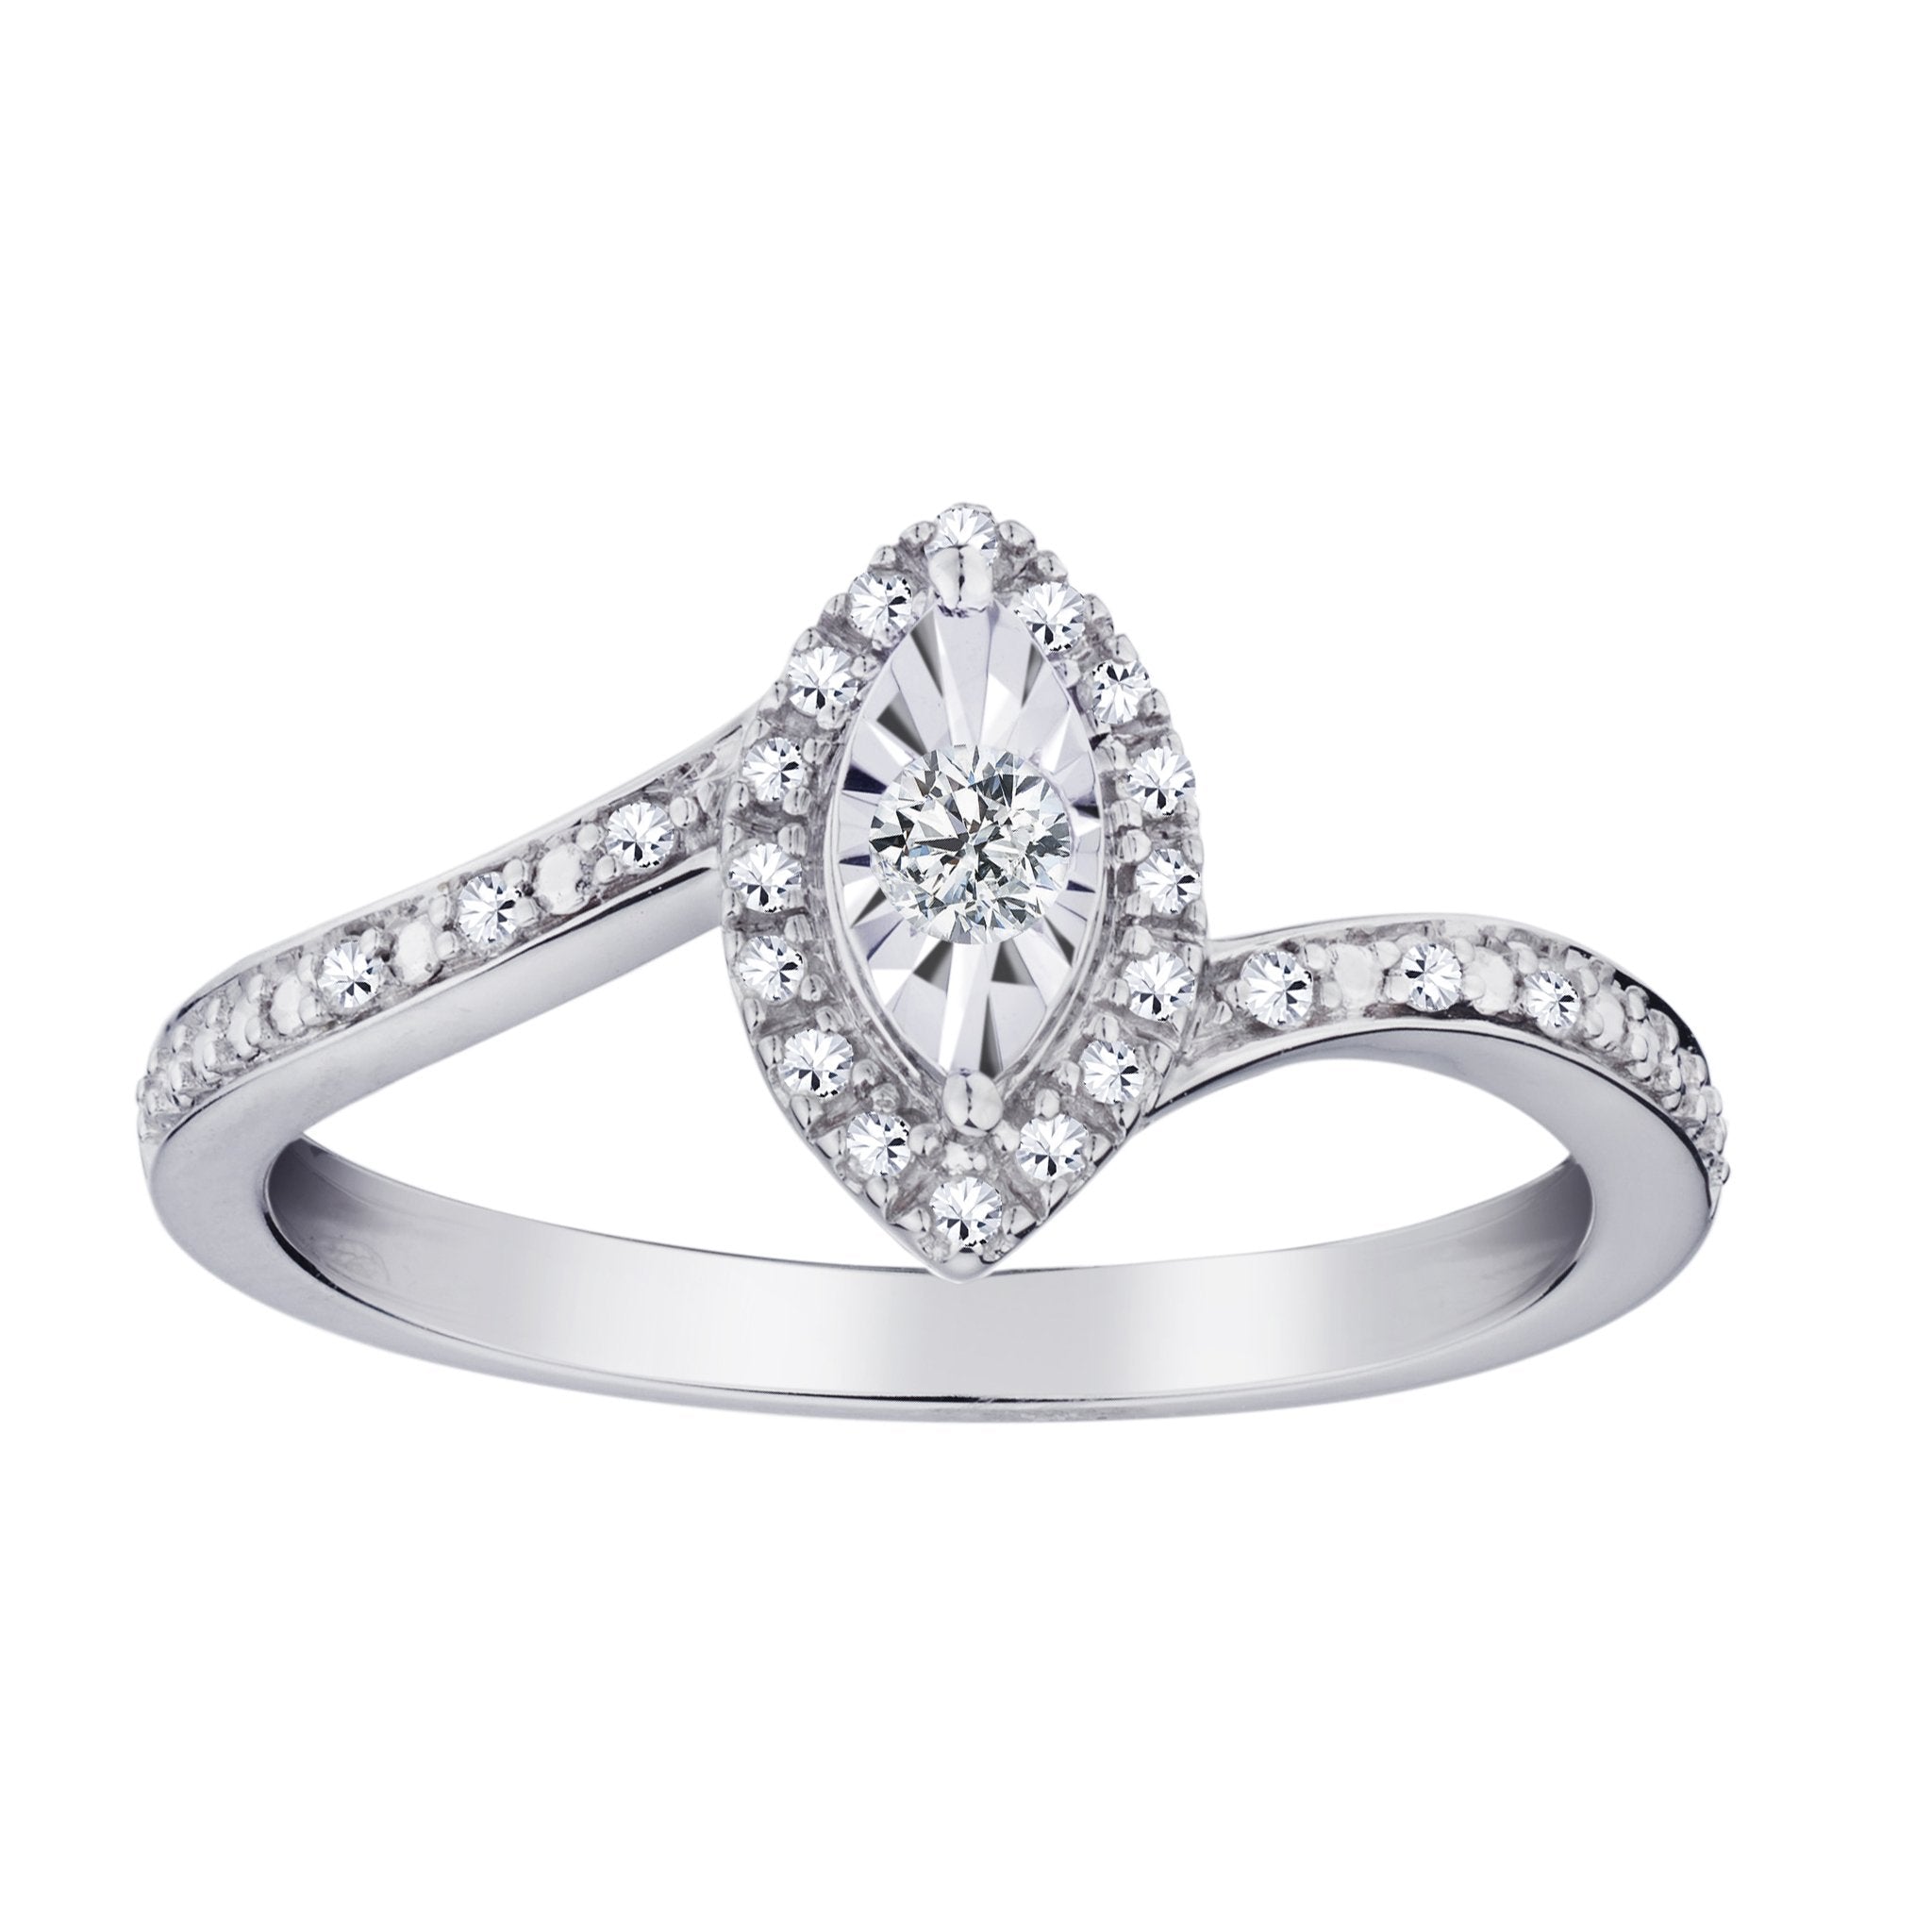 .15 CARAT DIAMOND "MARQUISE" STYLE RING, 10kt WHITE GOLD. Fashion Rings - Griffin Jewellery Designs